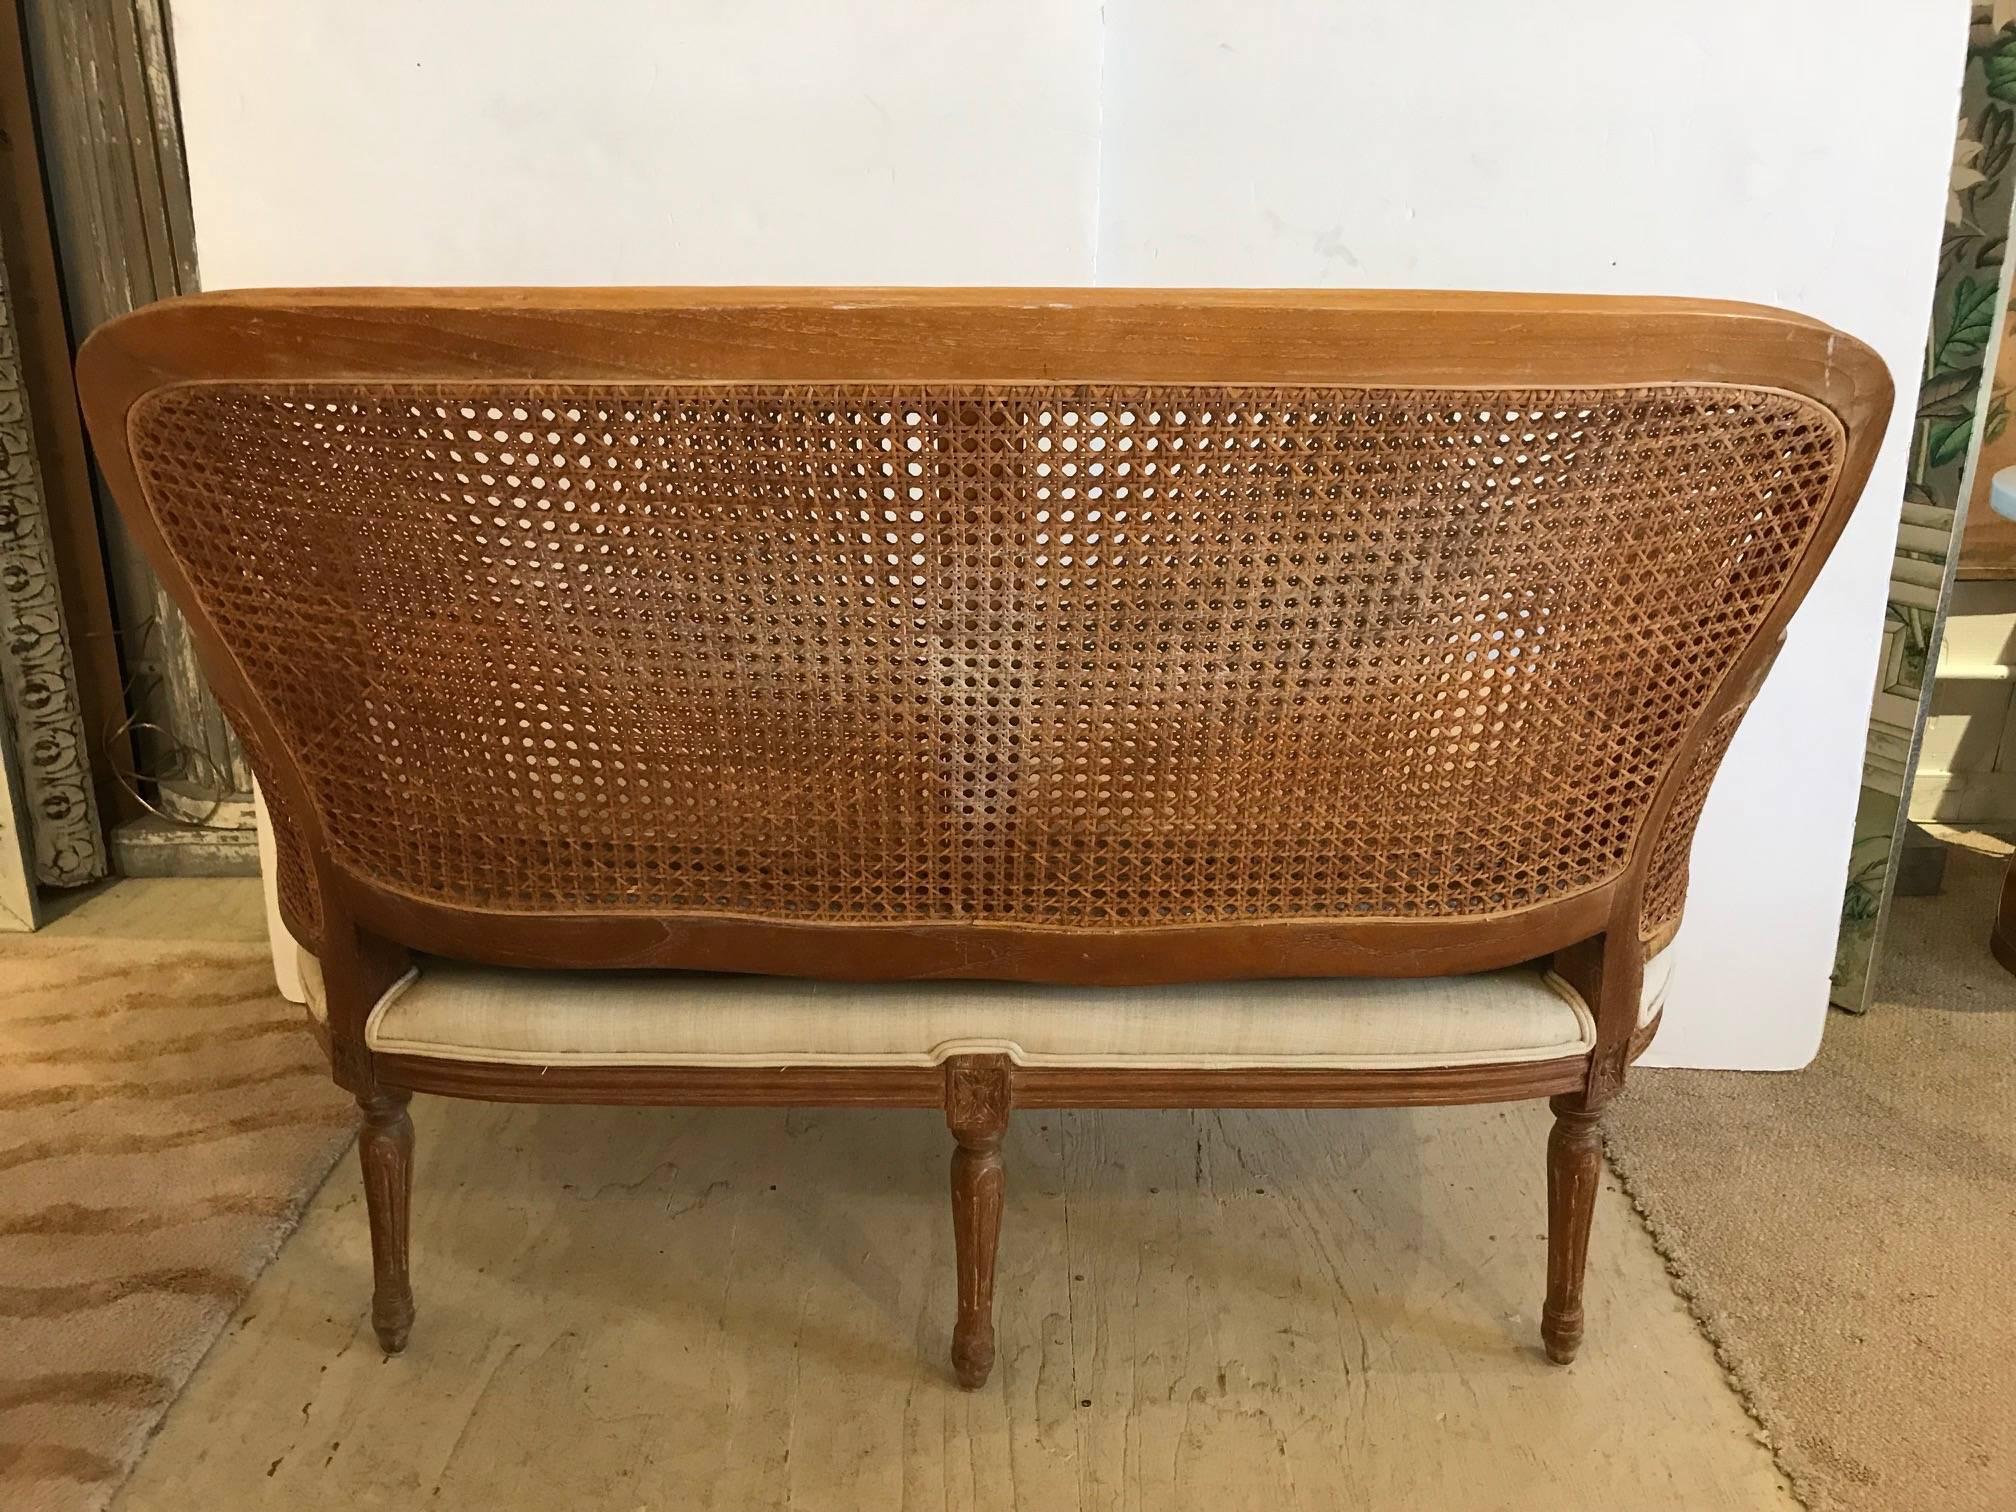 Classically elegant curved double caned loveseat having pretty carved wood arms and legs and an upholstered seat with removable seat cushion.
Measures: Seat: 22 D x 18 H.
    